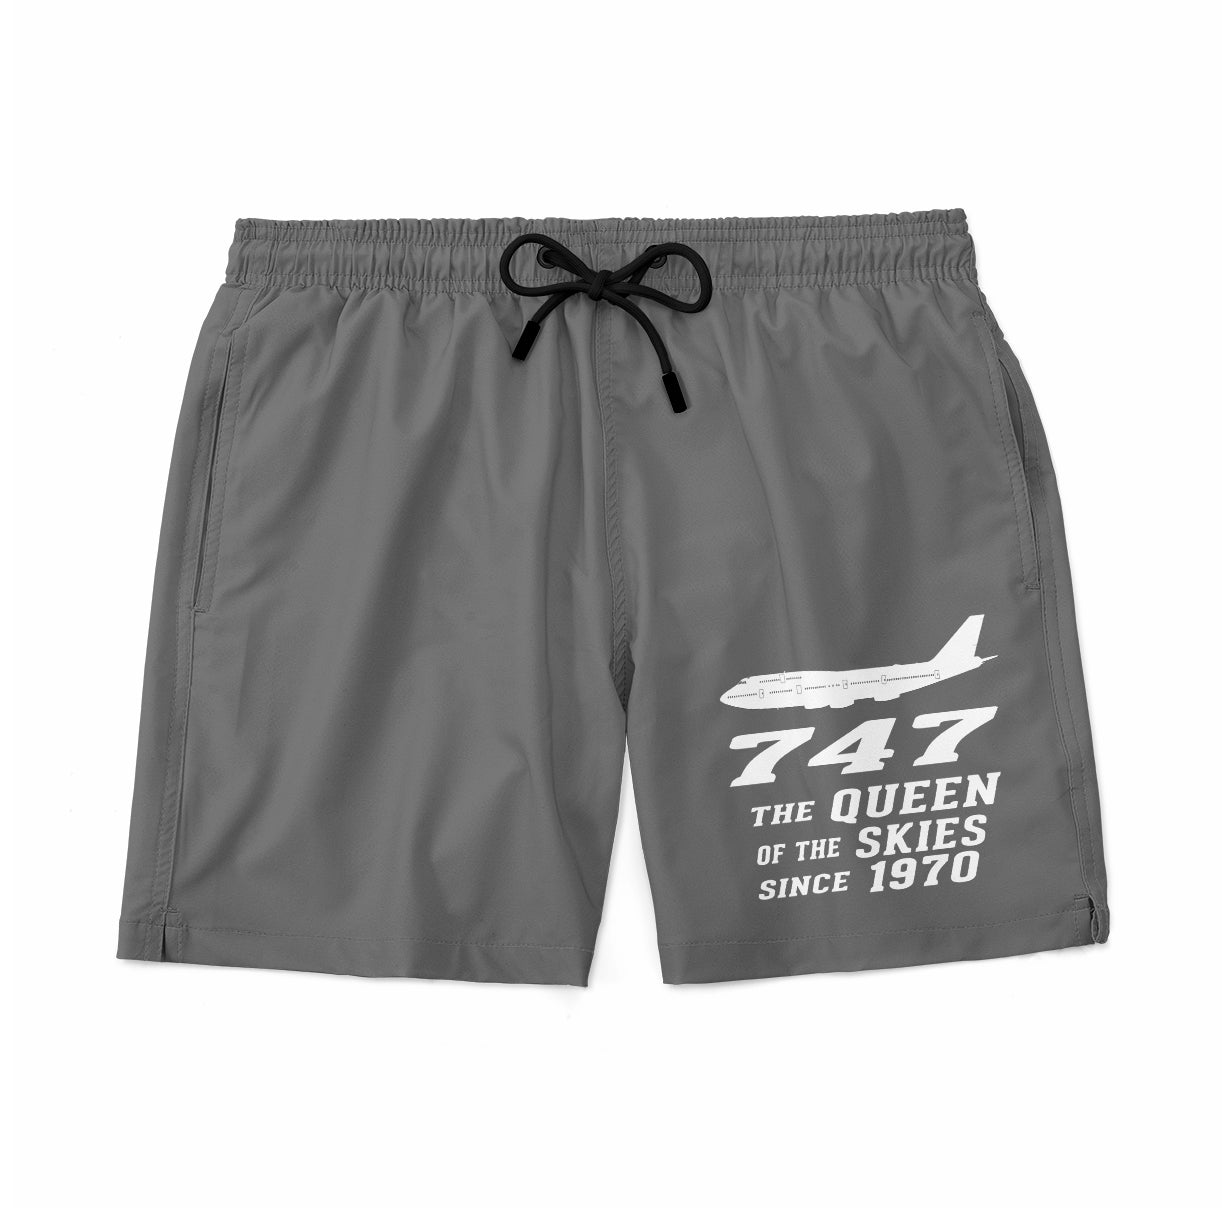 Boeing 747 - Queen of the Skies (2) Designed Swim Trunks & Shorts